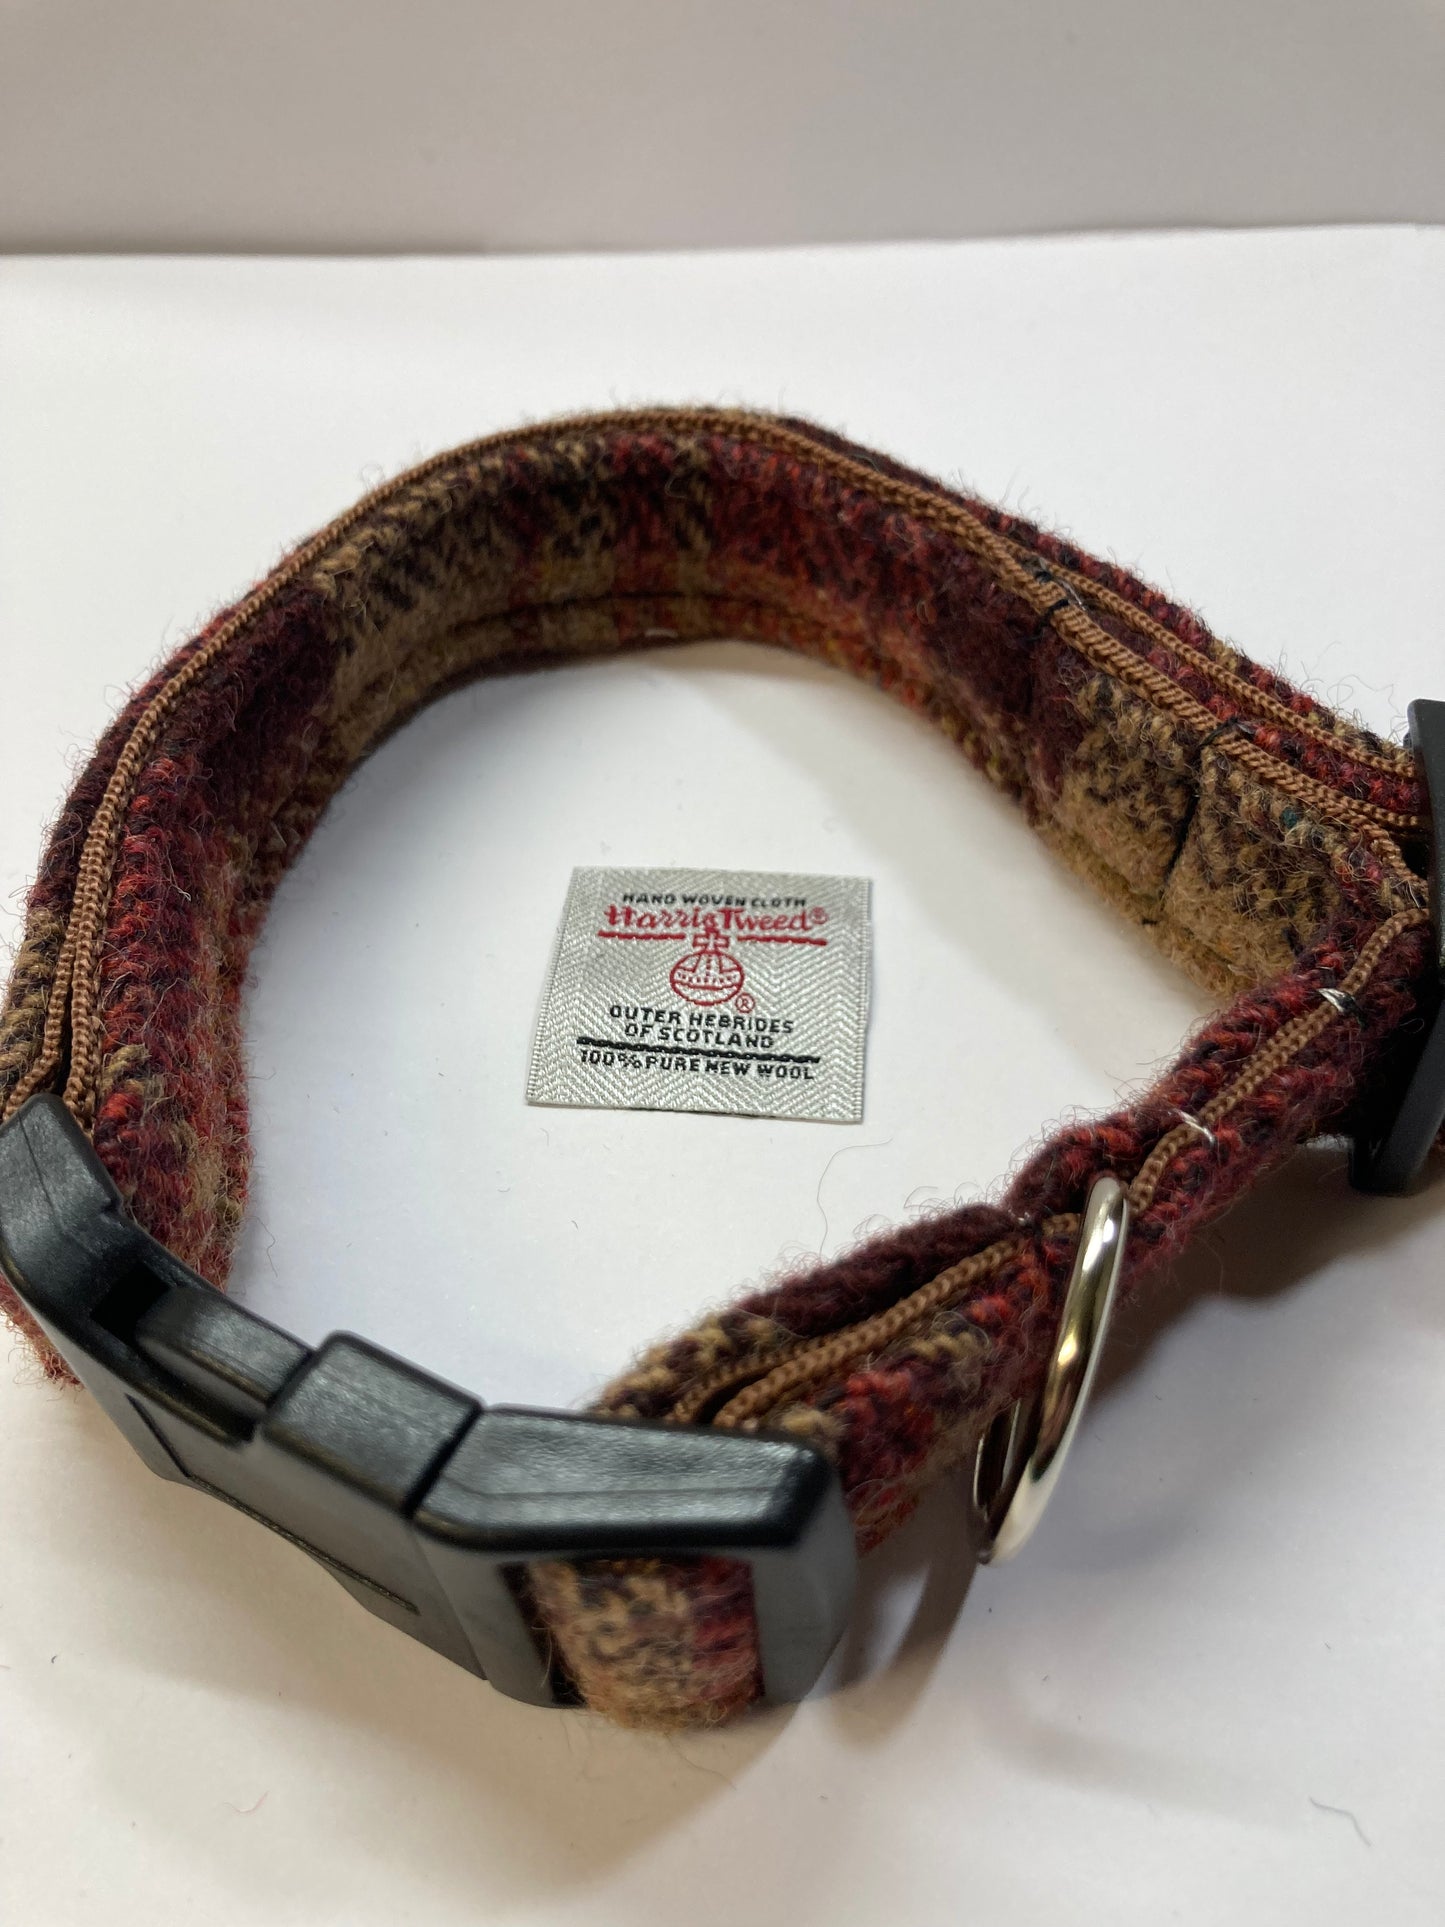 Harris Tweed Dog Collar Brown and Fawn check View with Harris Tweed Label